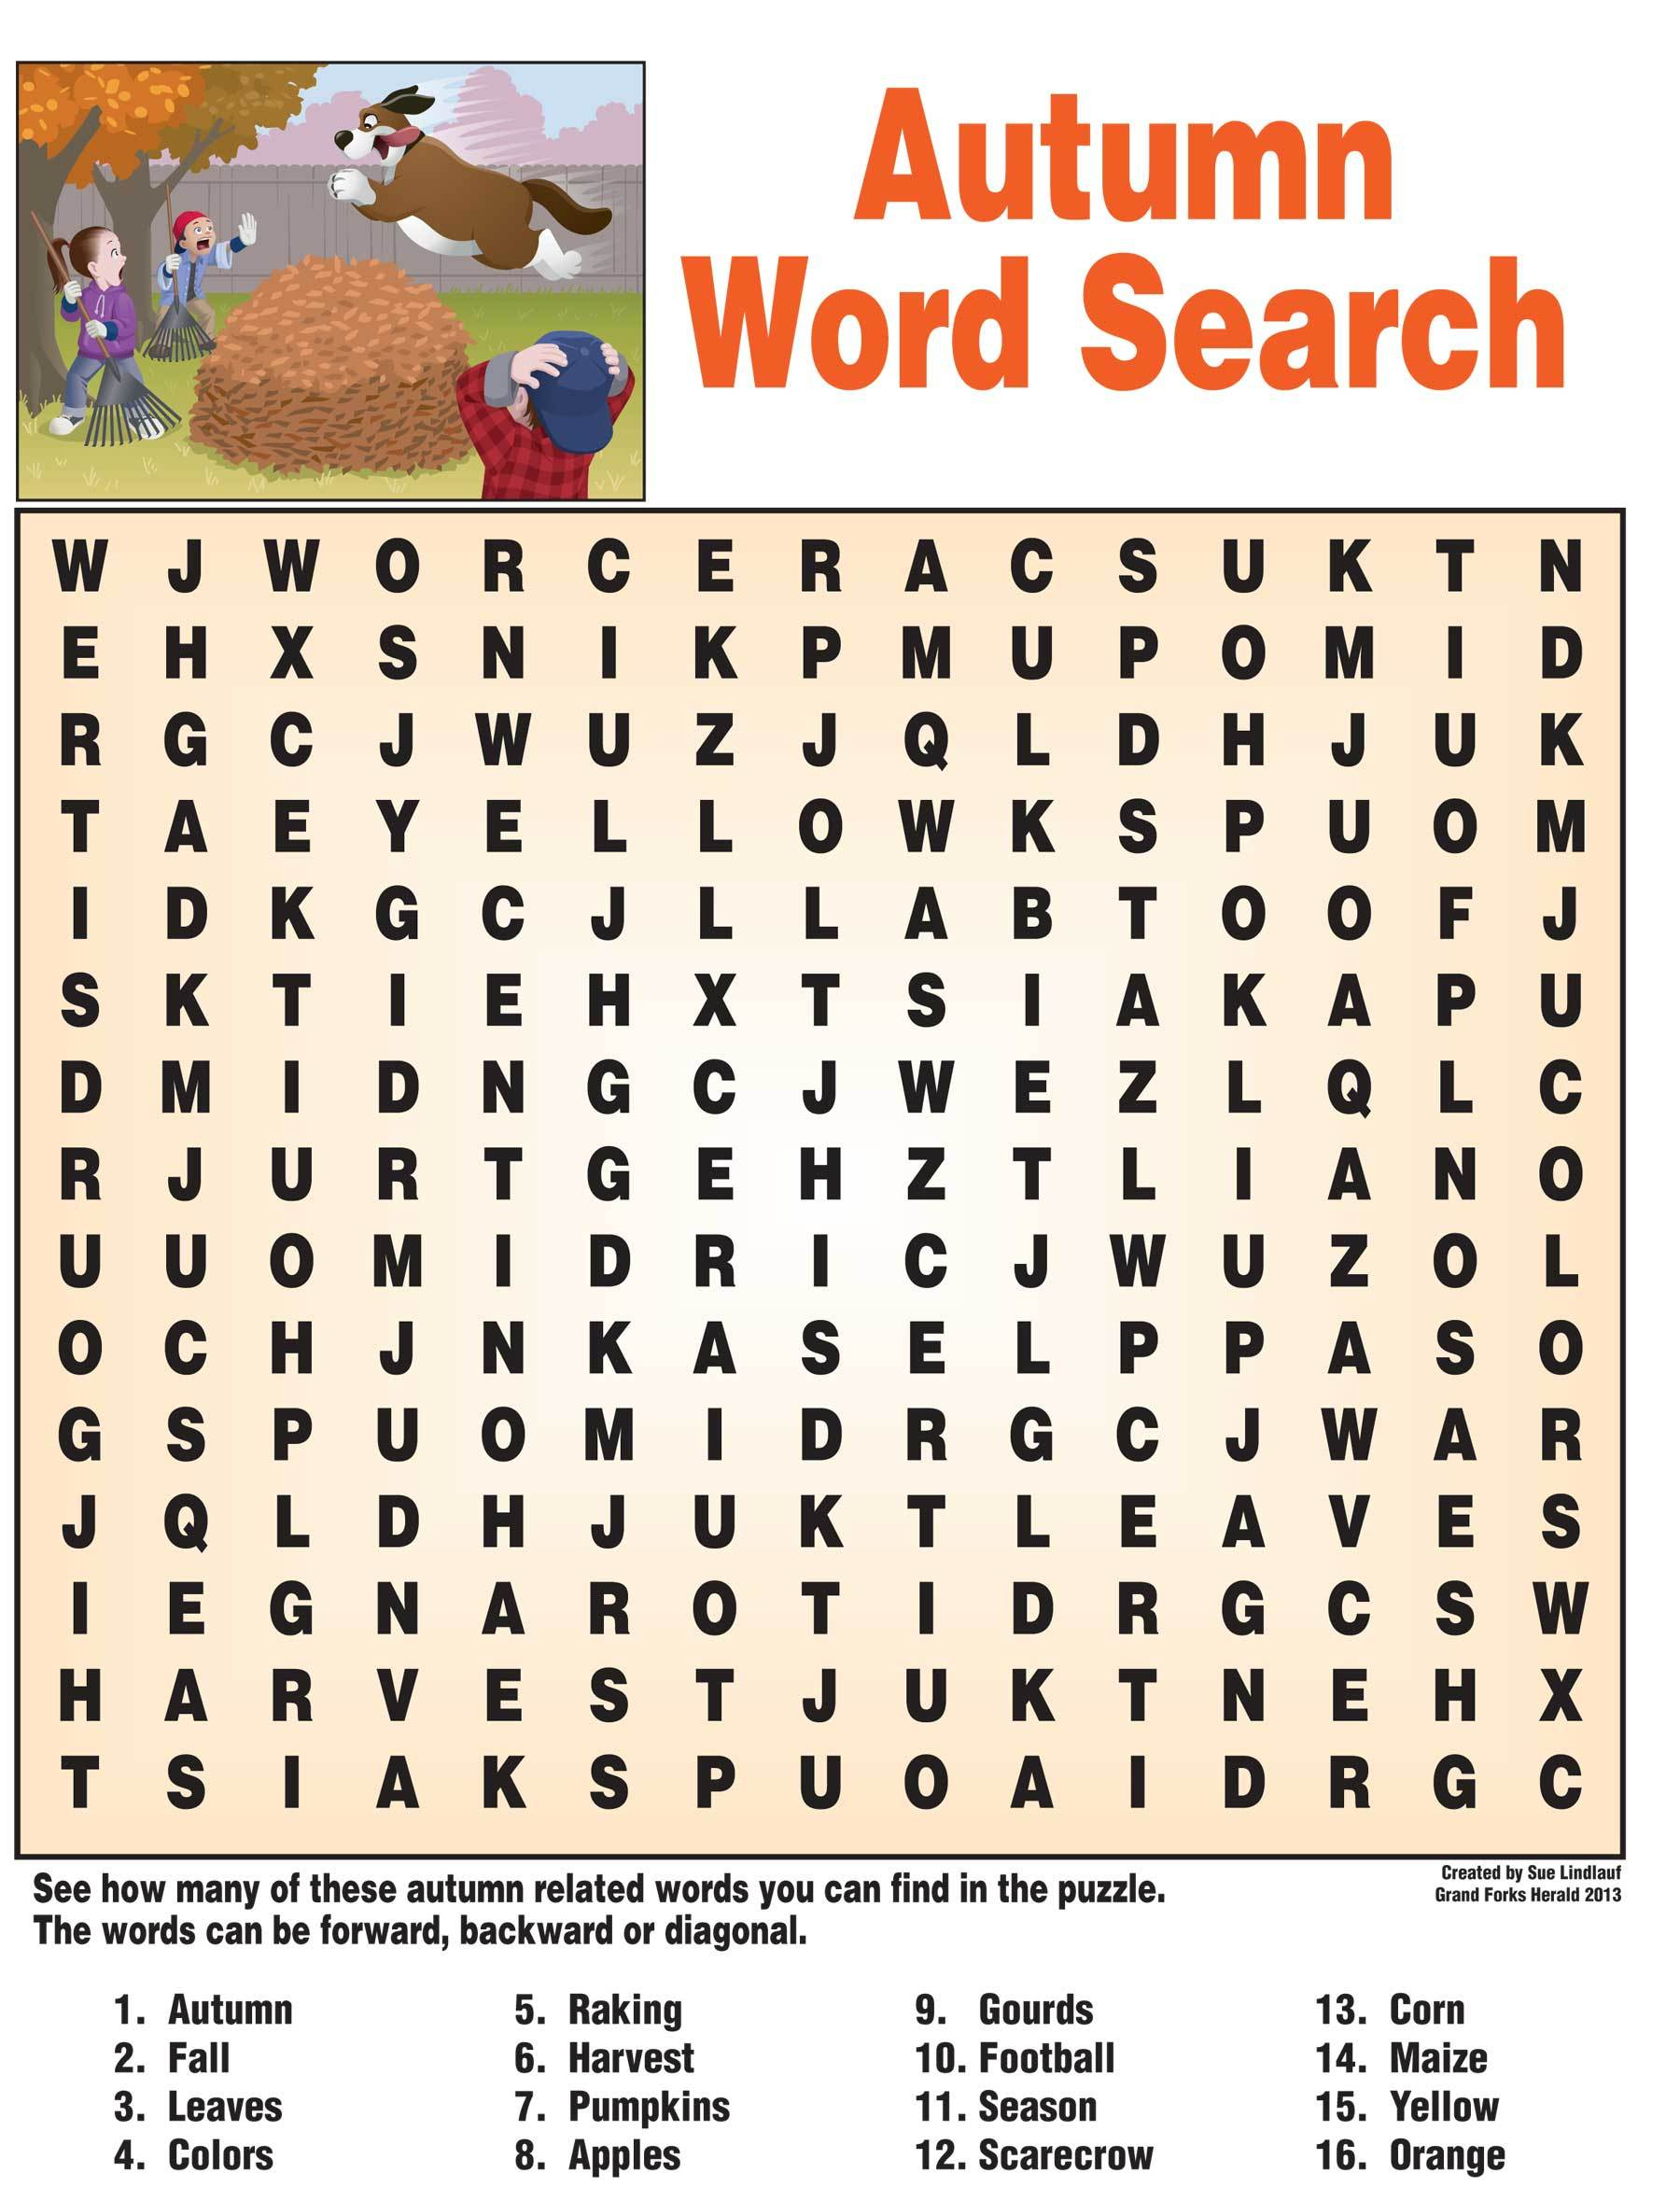 Free Printable Word Searches For Middle School Students Free Printable